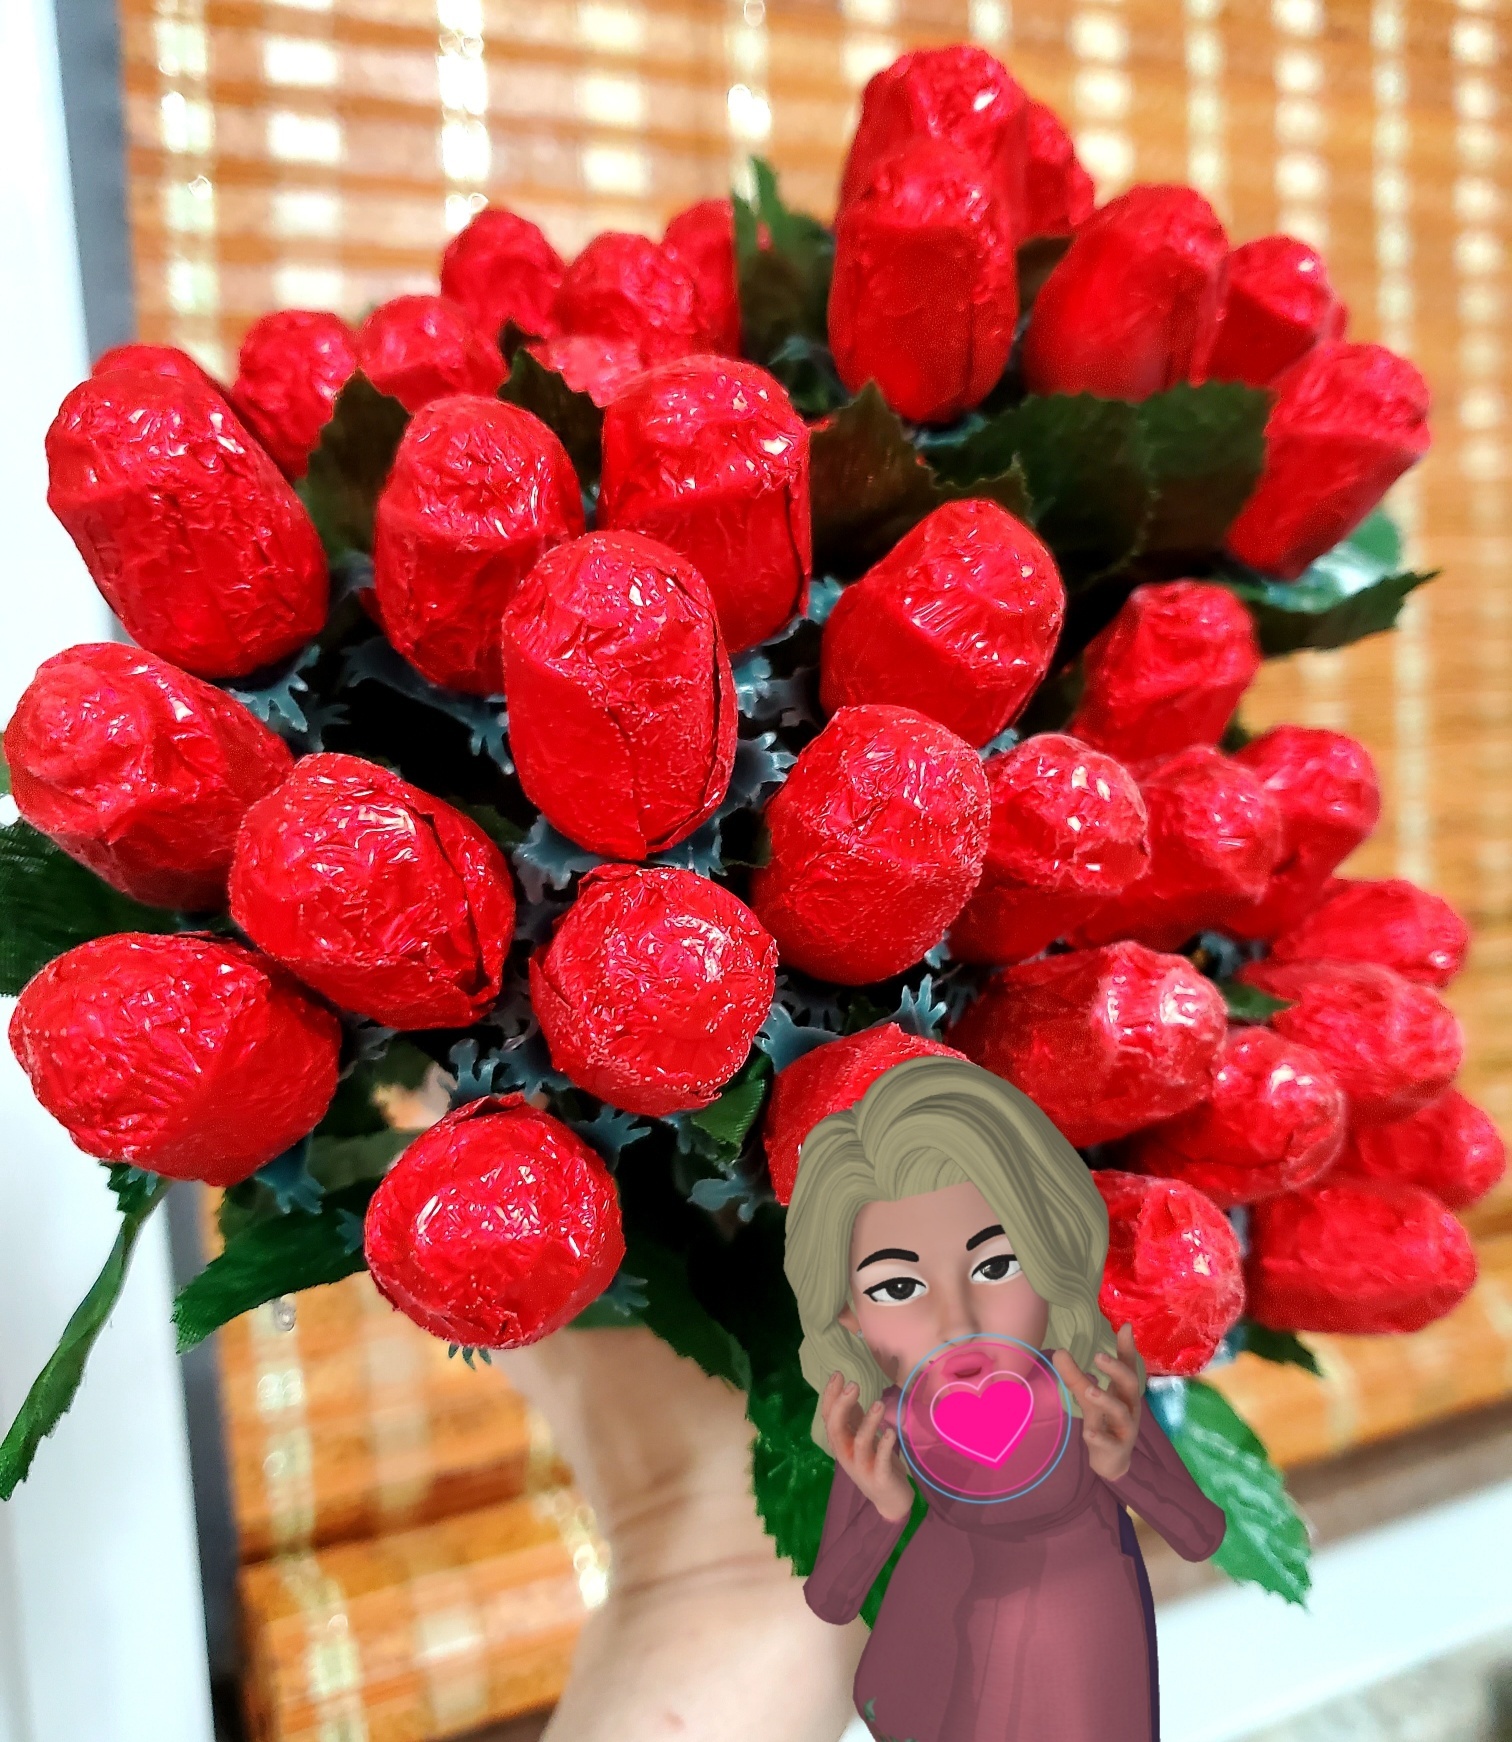 The_BEST_RED_Roses_EVER_7ntox.jpg